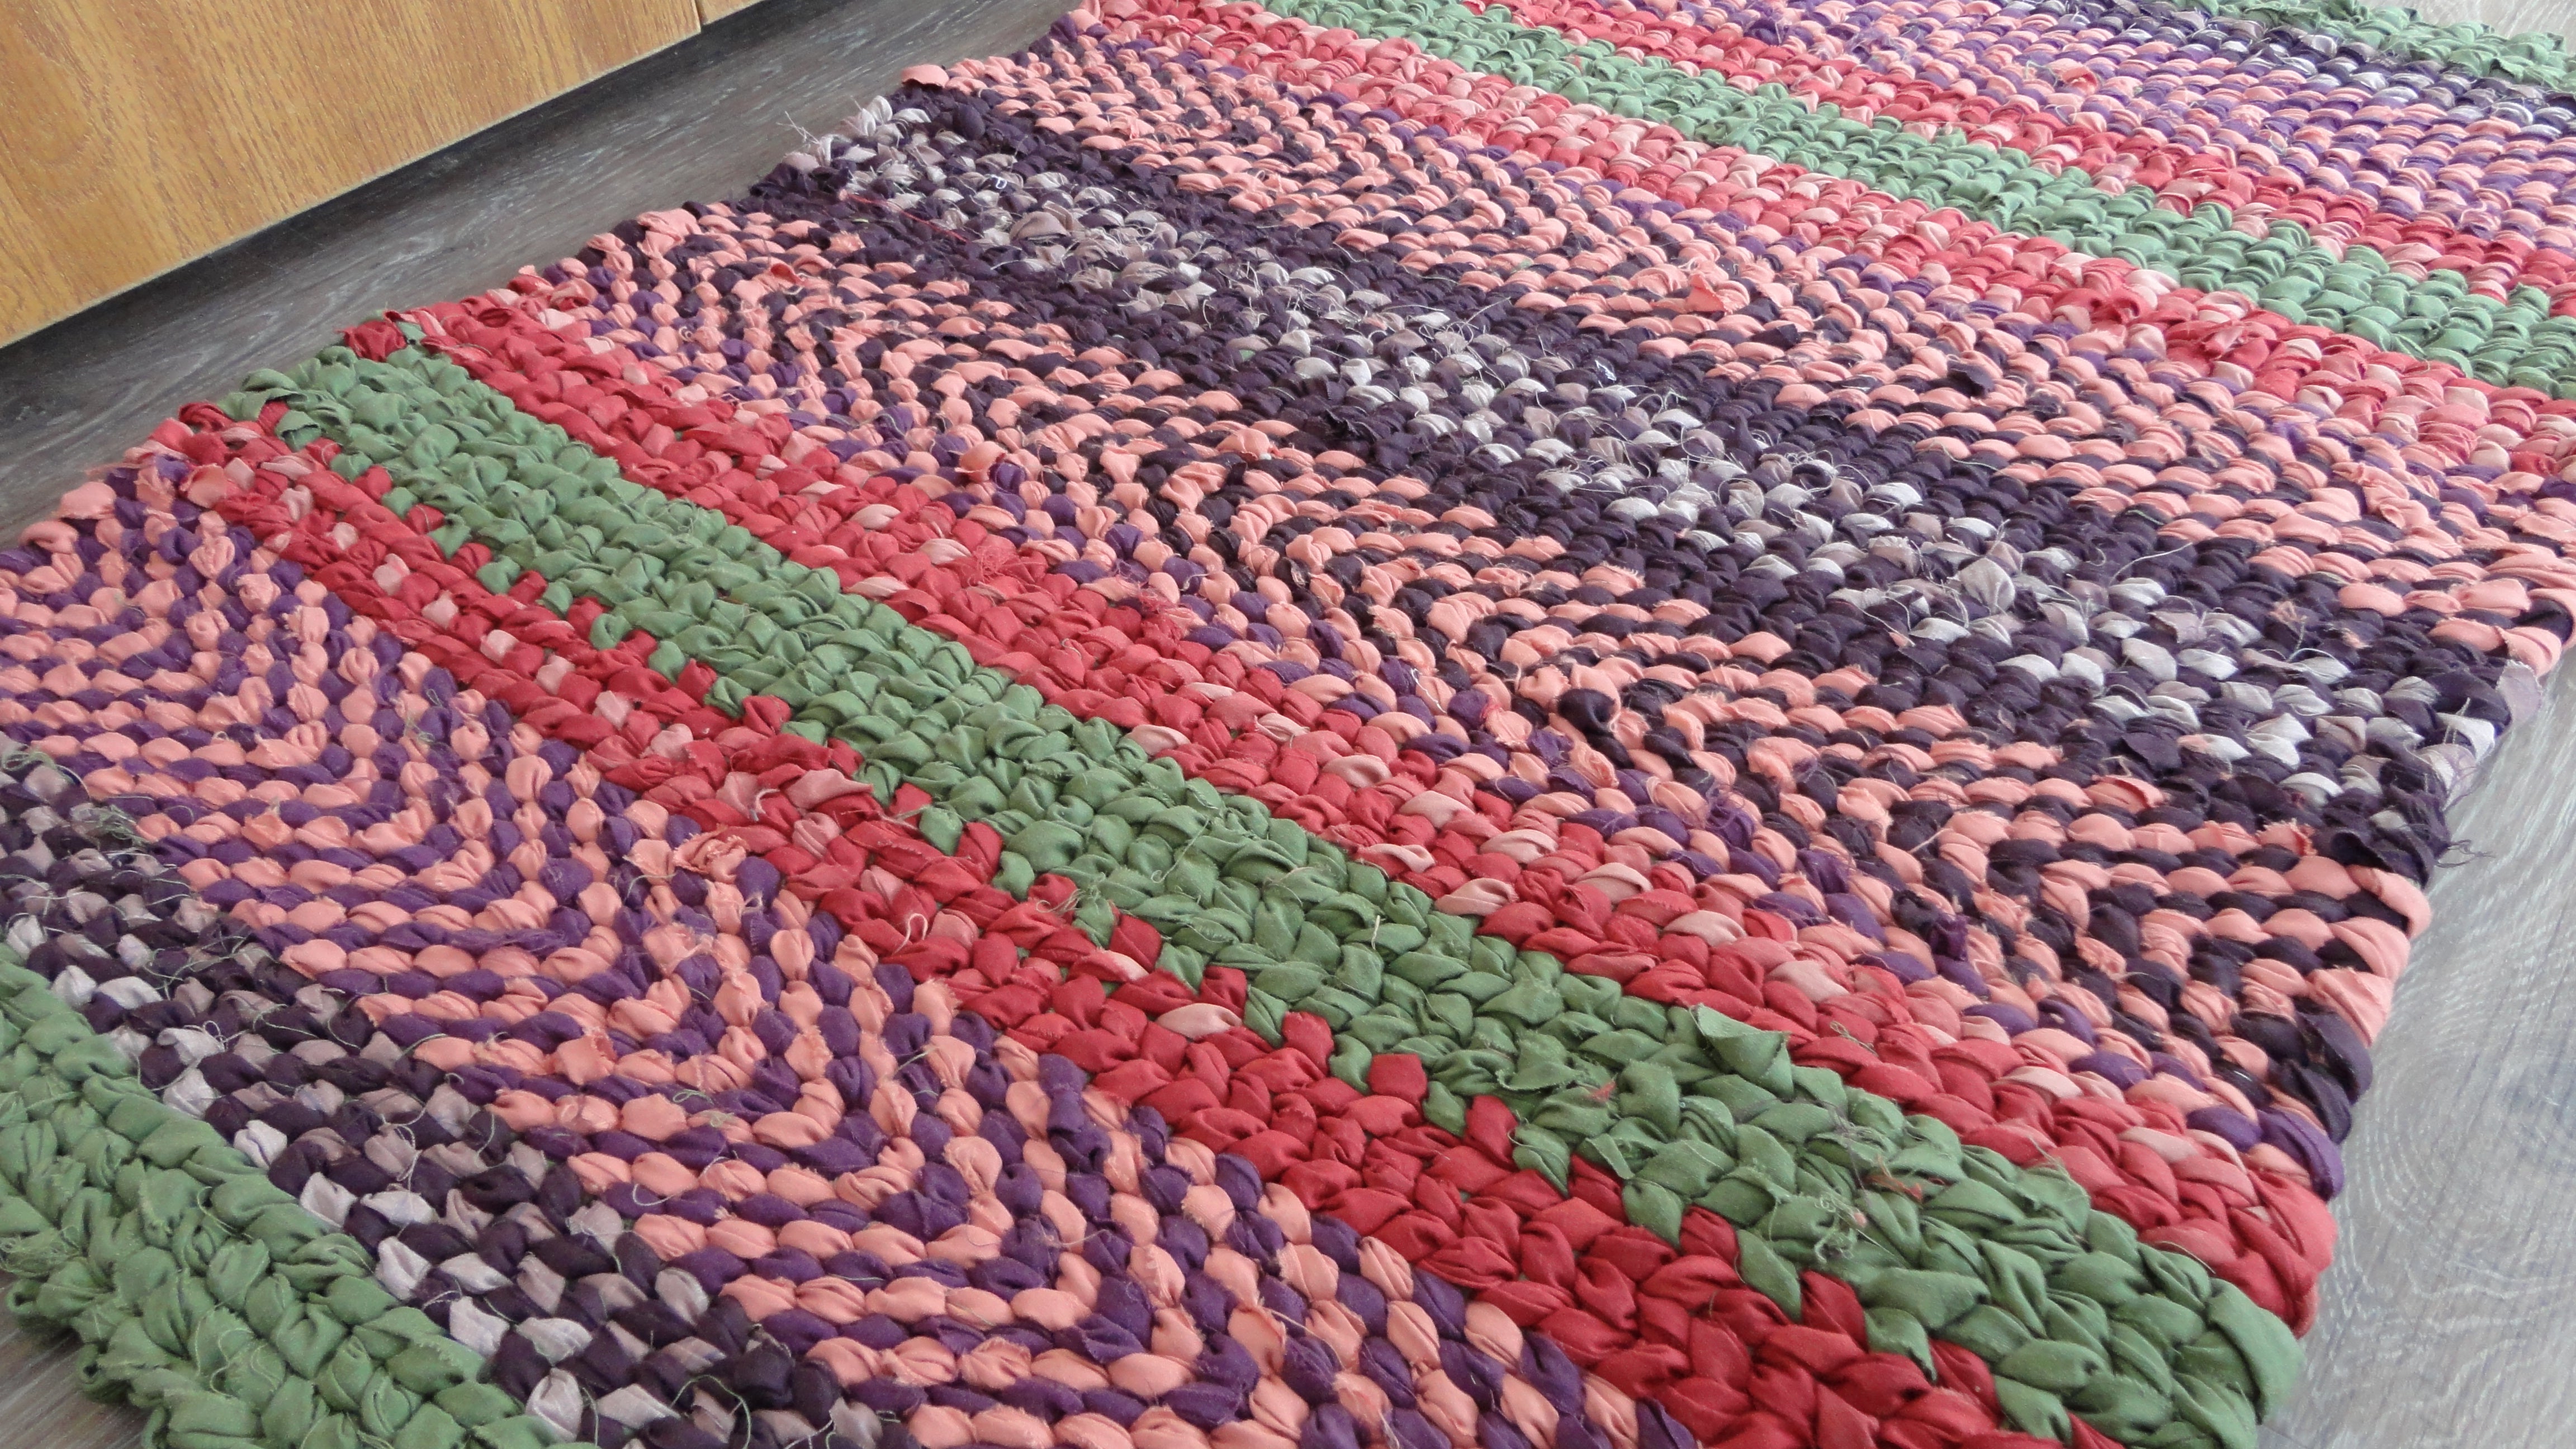 Watermelon Party green, cherry red, purple and coral pink handwoven twined rag rug woven carpet